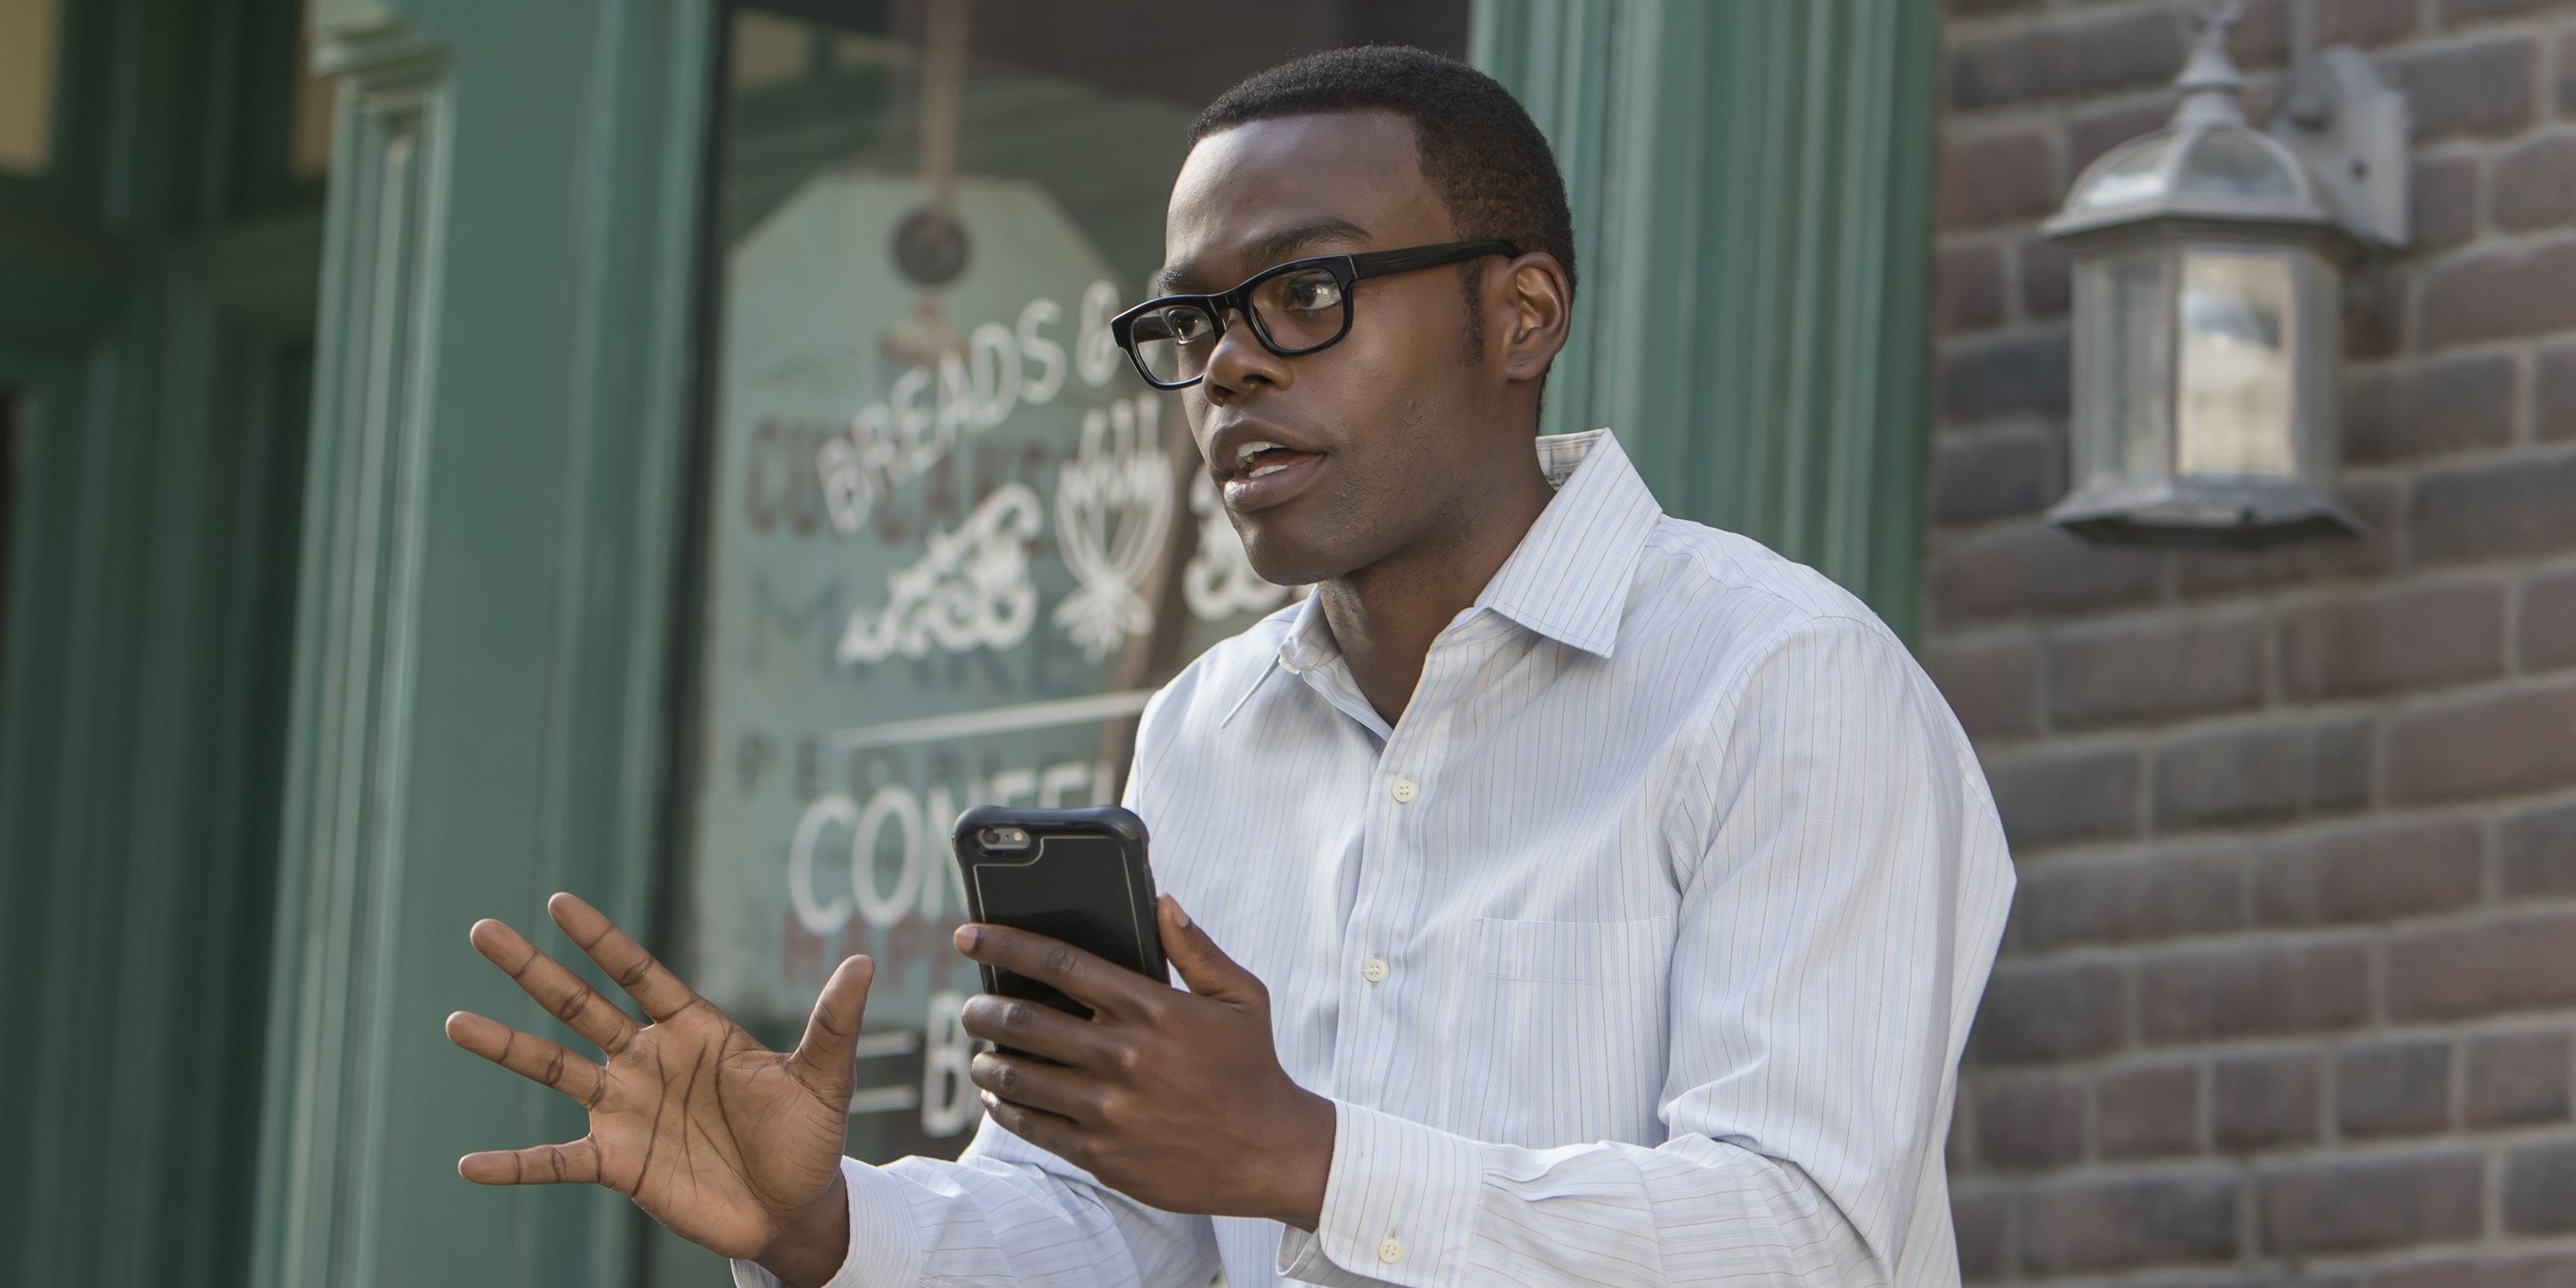 Chidi speaking on his phone in The Good Place